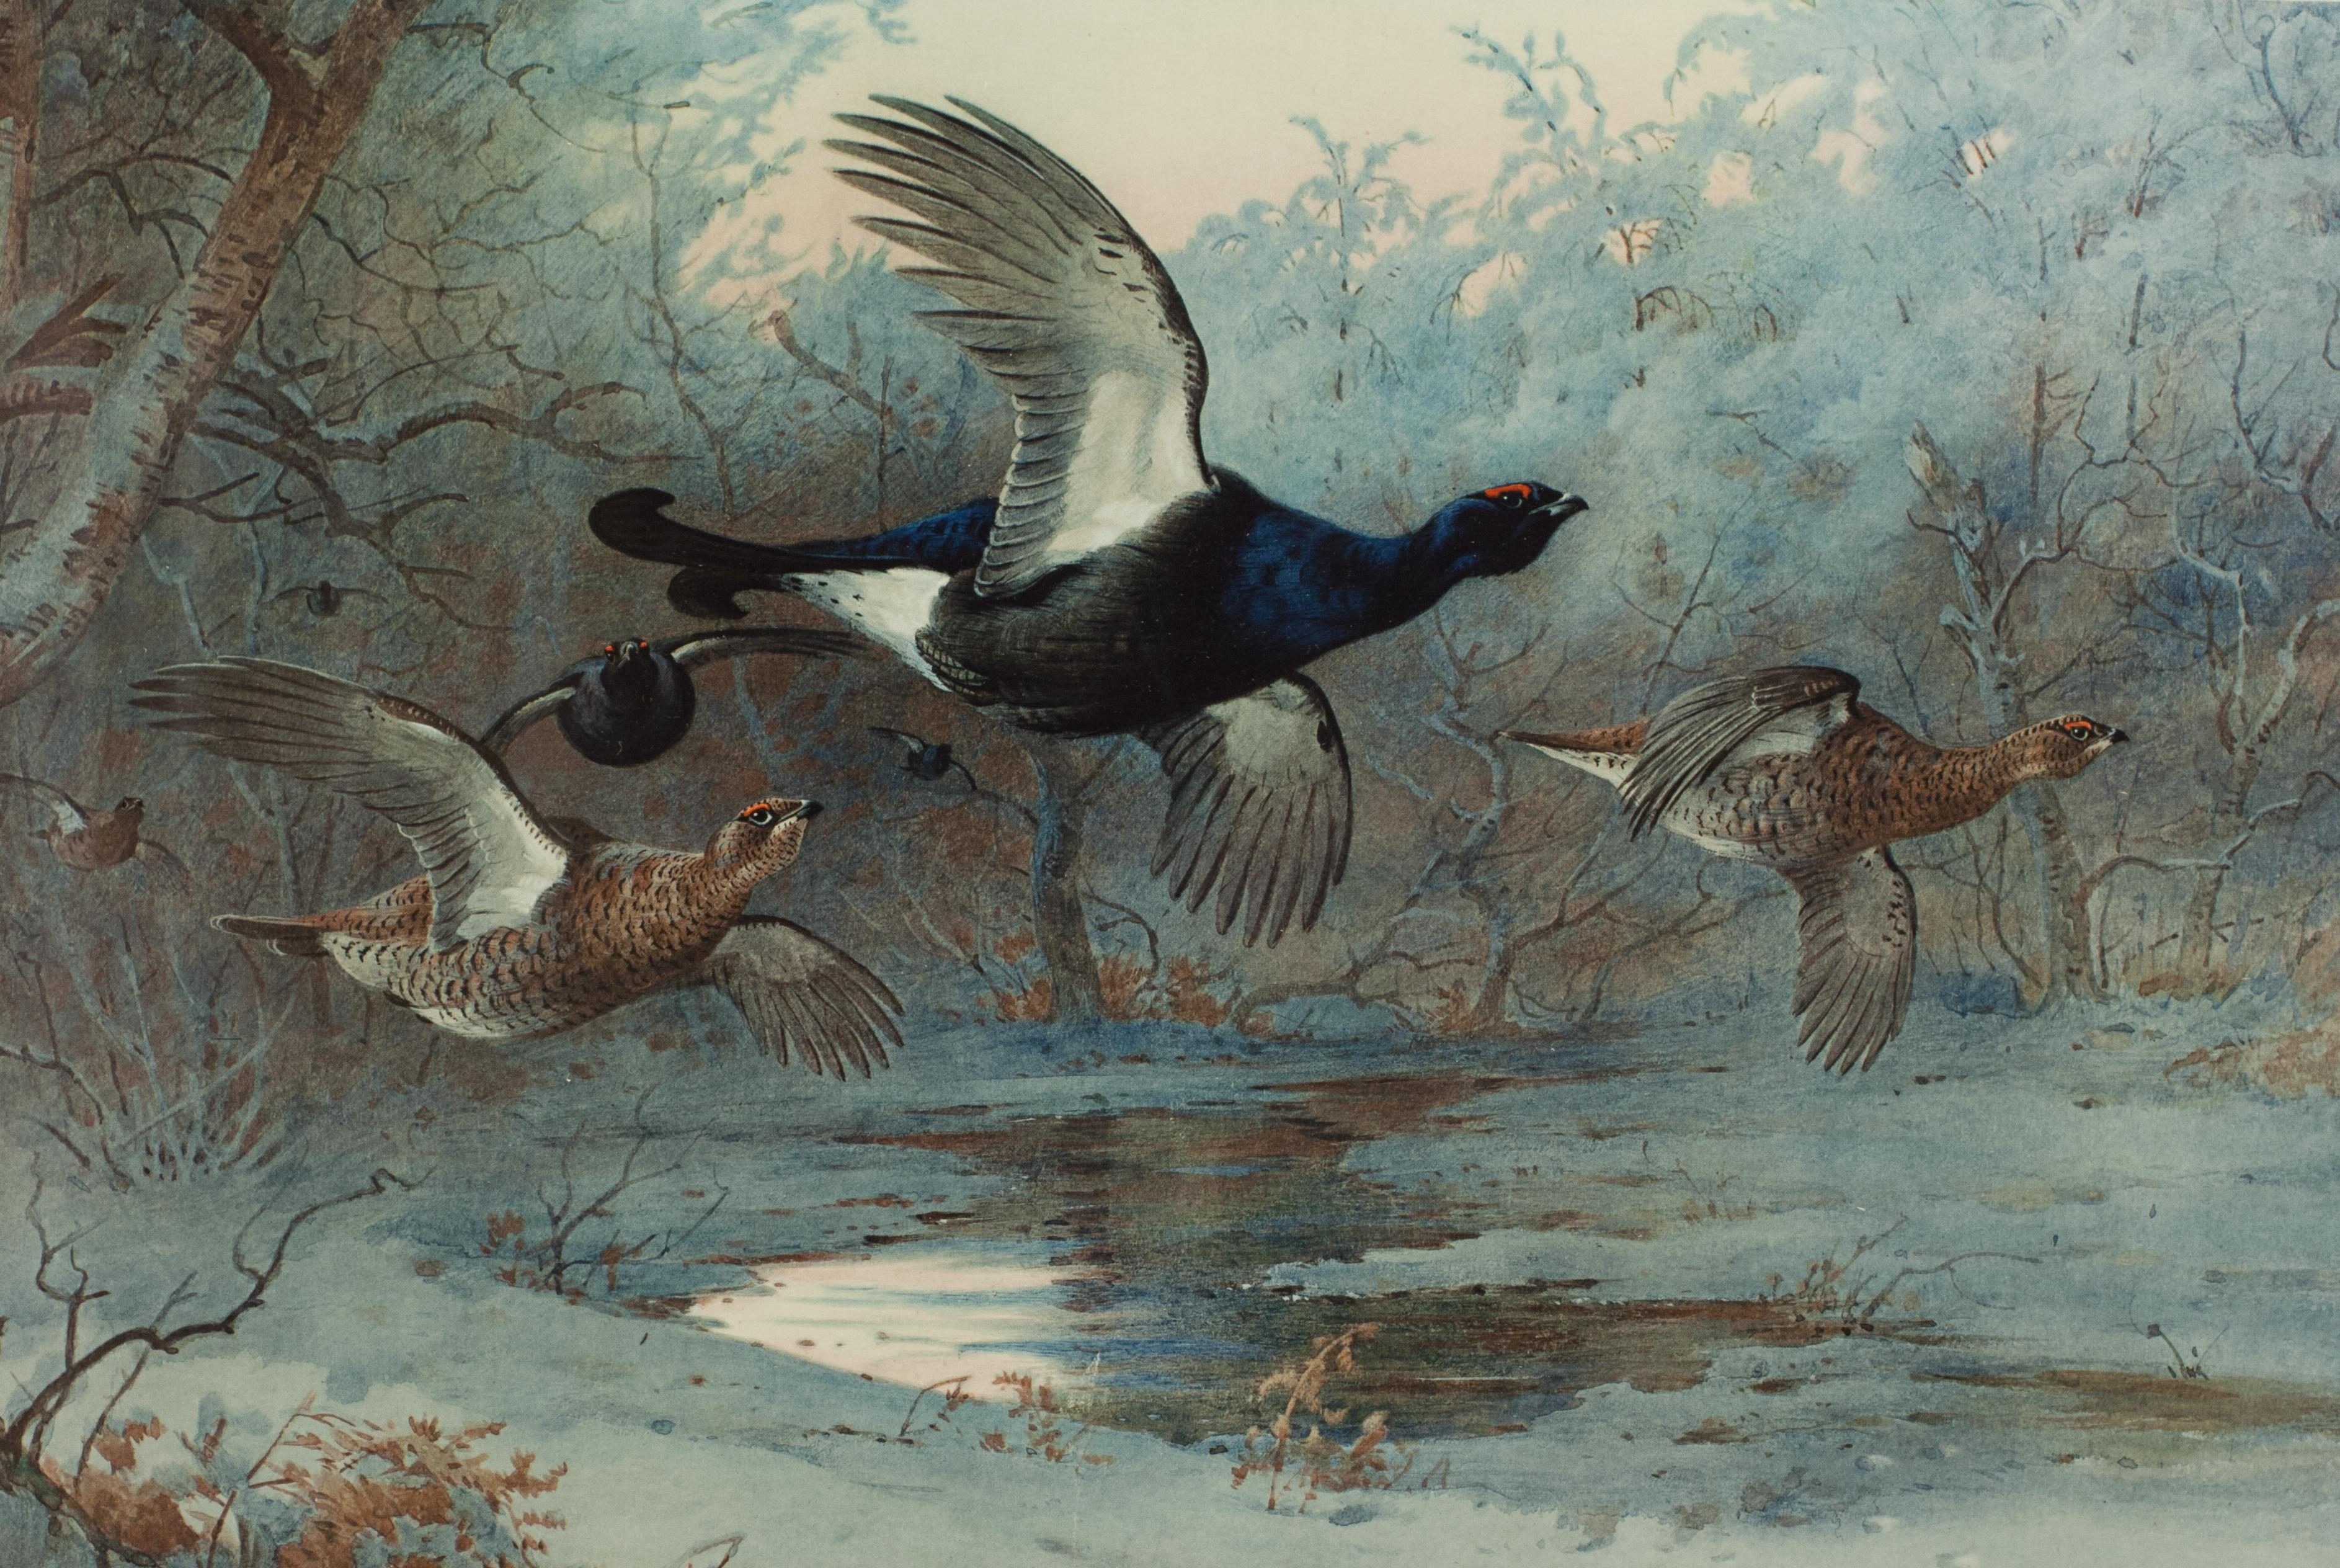 Vintage Game Bird Prints, Colotypes by Archibald Thorburn 'The Seasons' 6